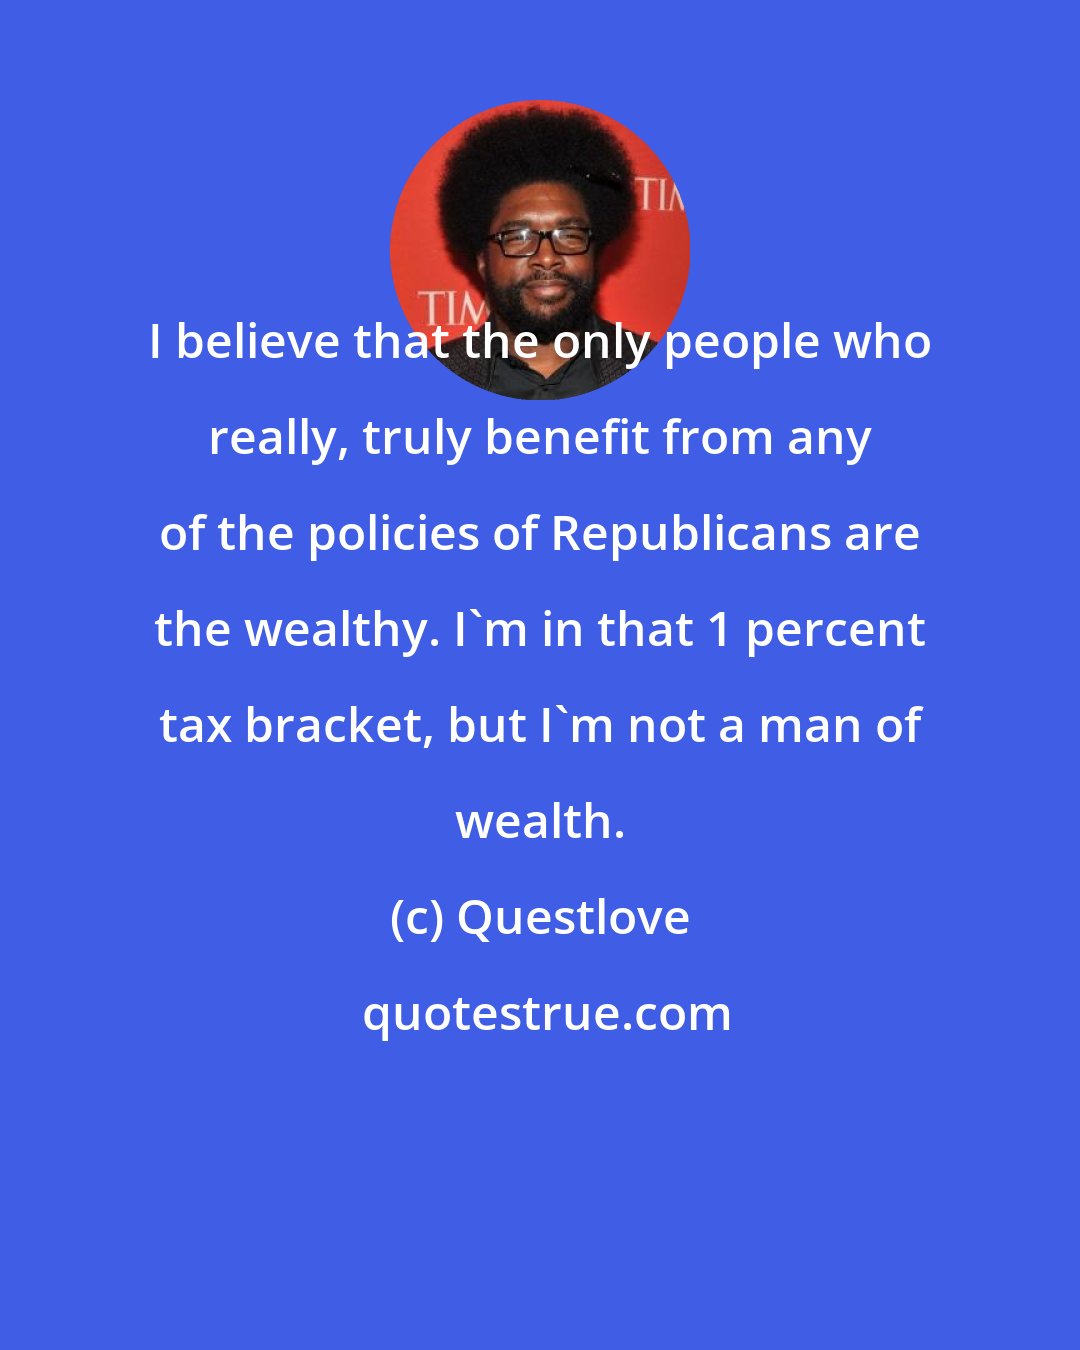 Questlove: I believe that the only people who really, truly benefit from any of the policies of Republicans are the wealthy. I'm in that 1 percent tax bracket, but I'm not a man of wealth.